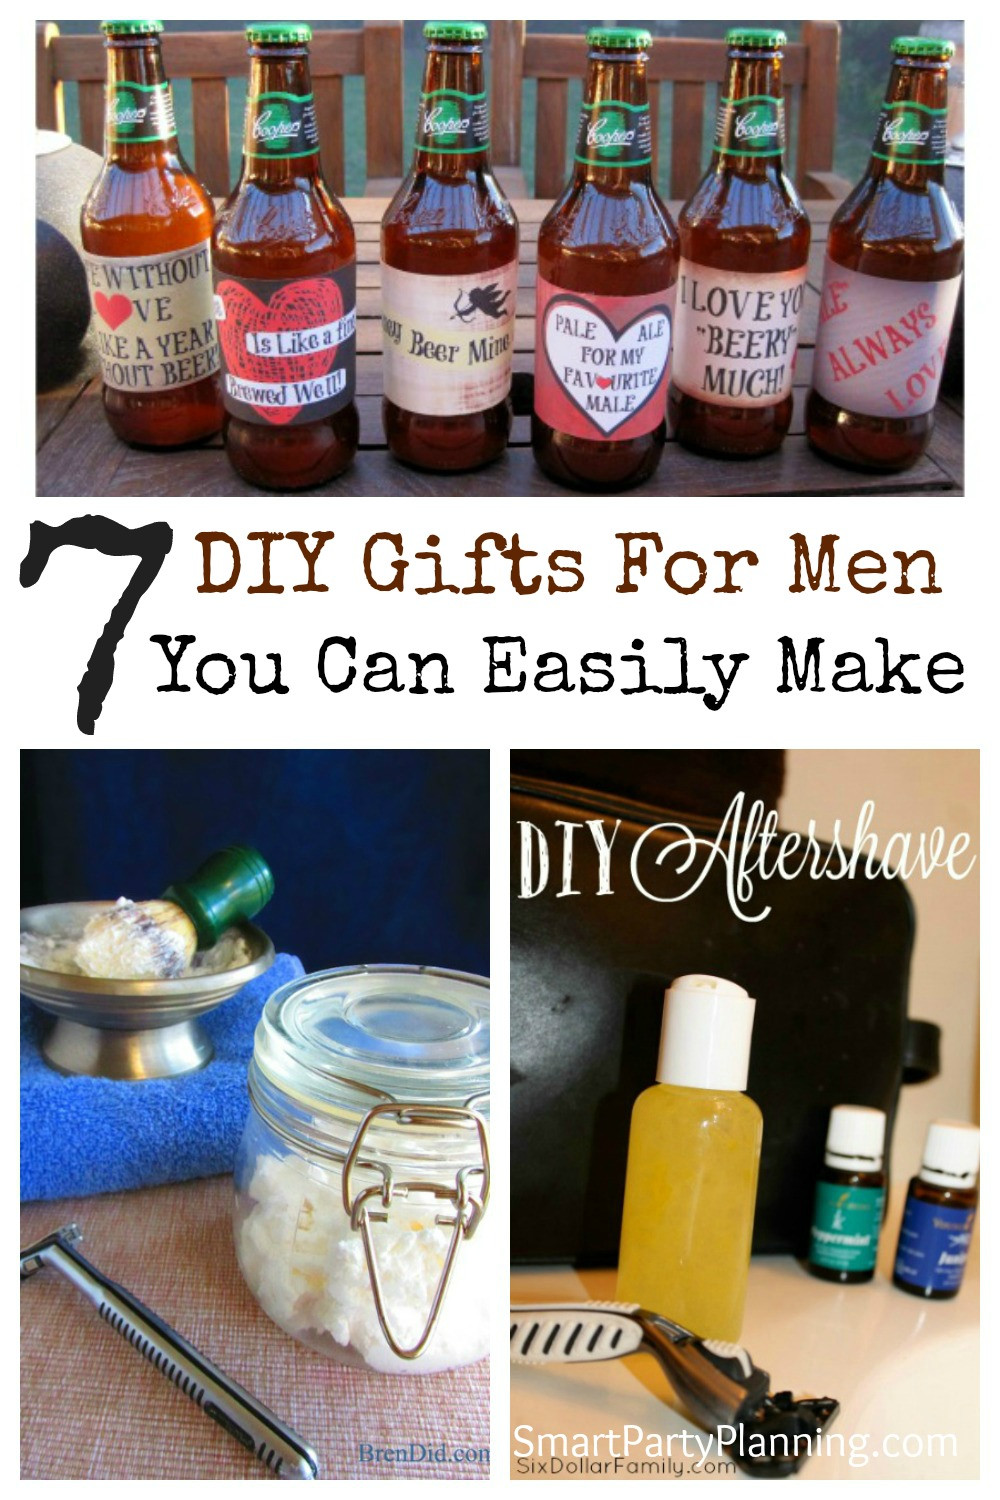 Gift Ideas For Guys For Valentines
 7 DIY Gifts For Men You Can Easily Make